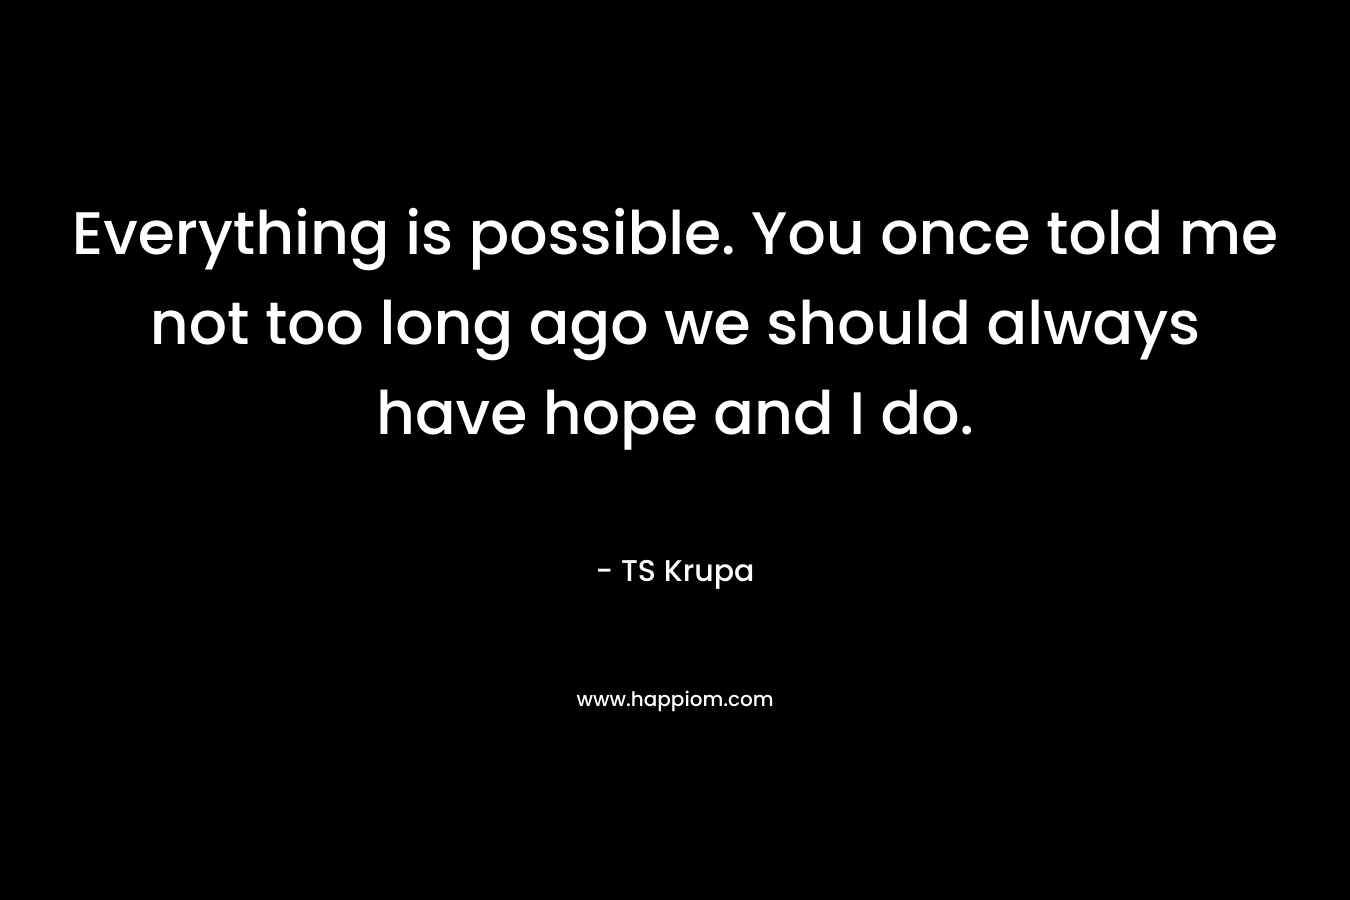 Everything is possible. You once told me not too long ago we should always have hope and I do.